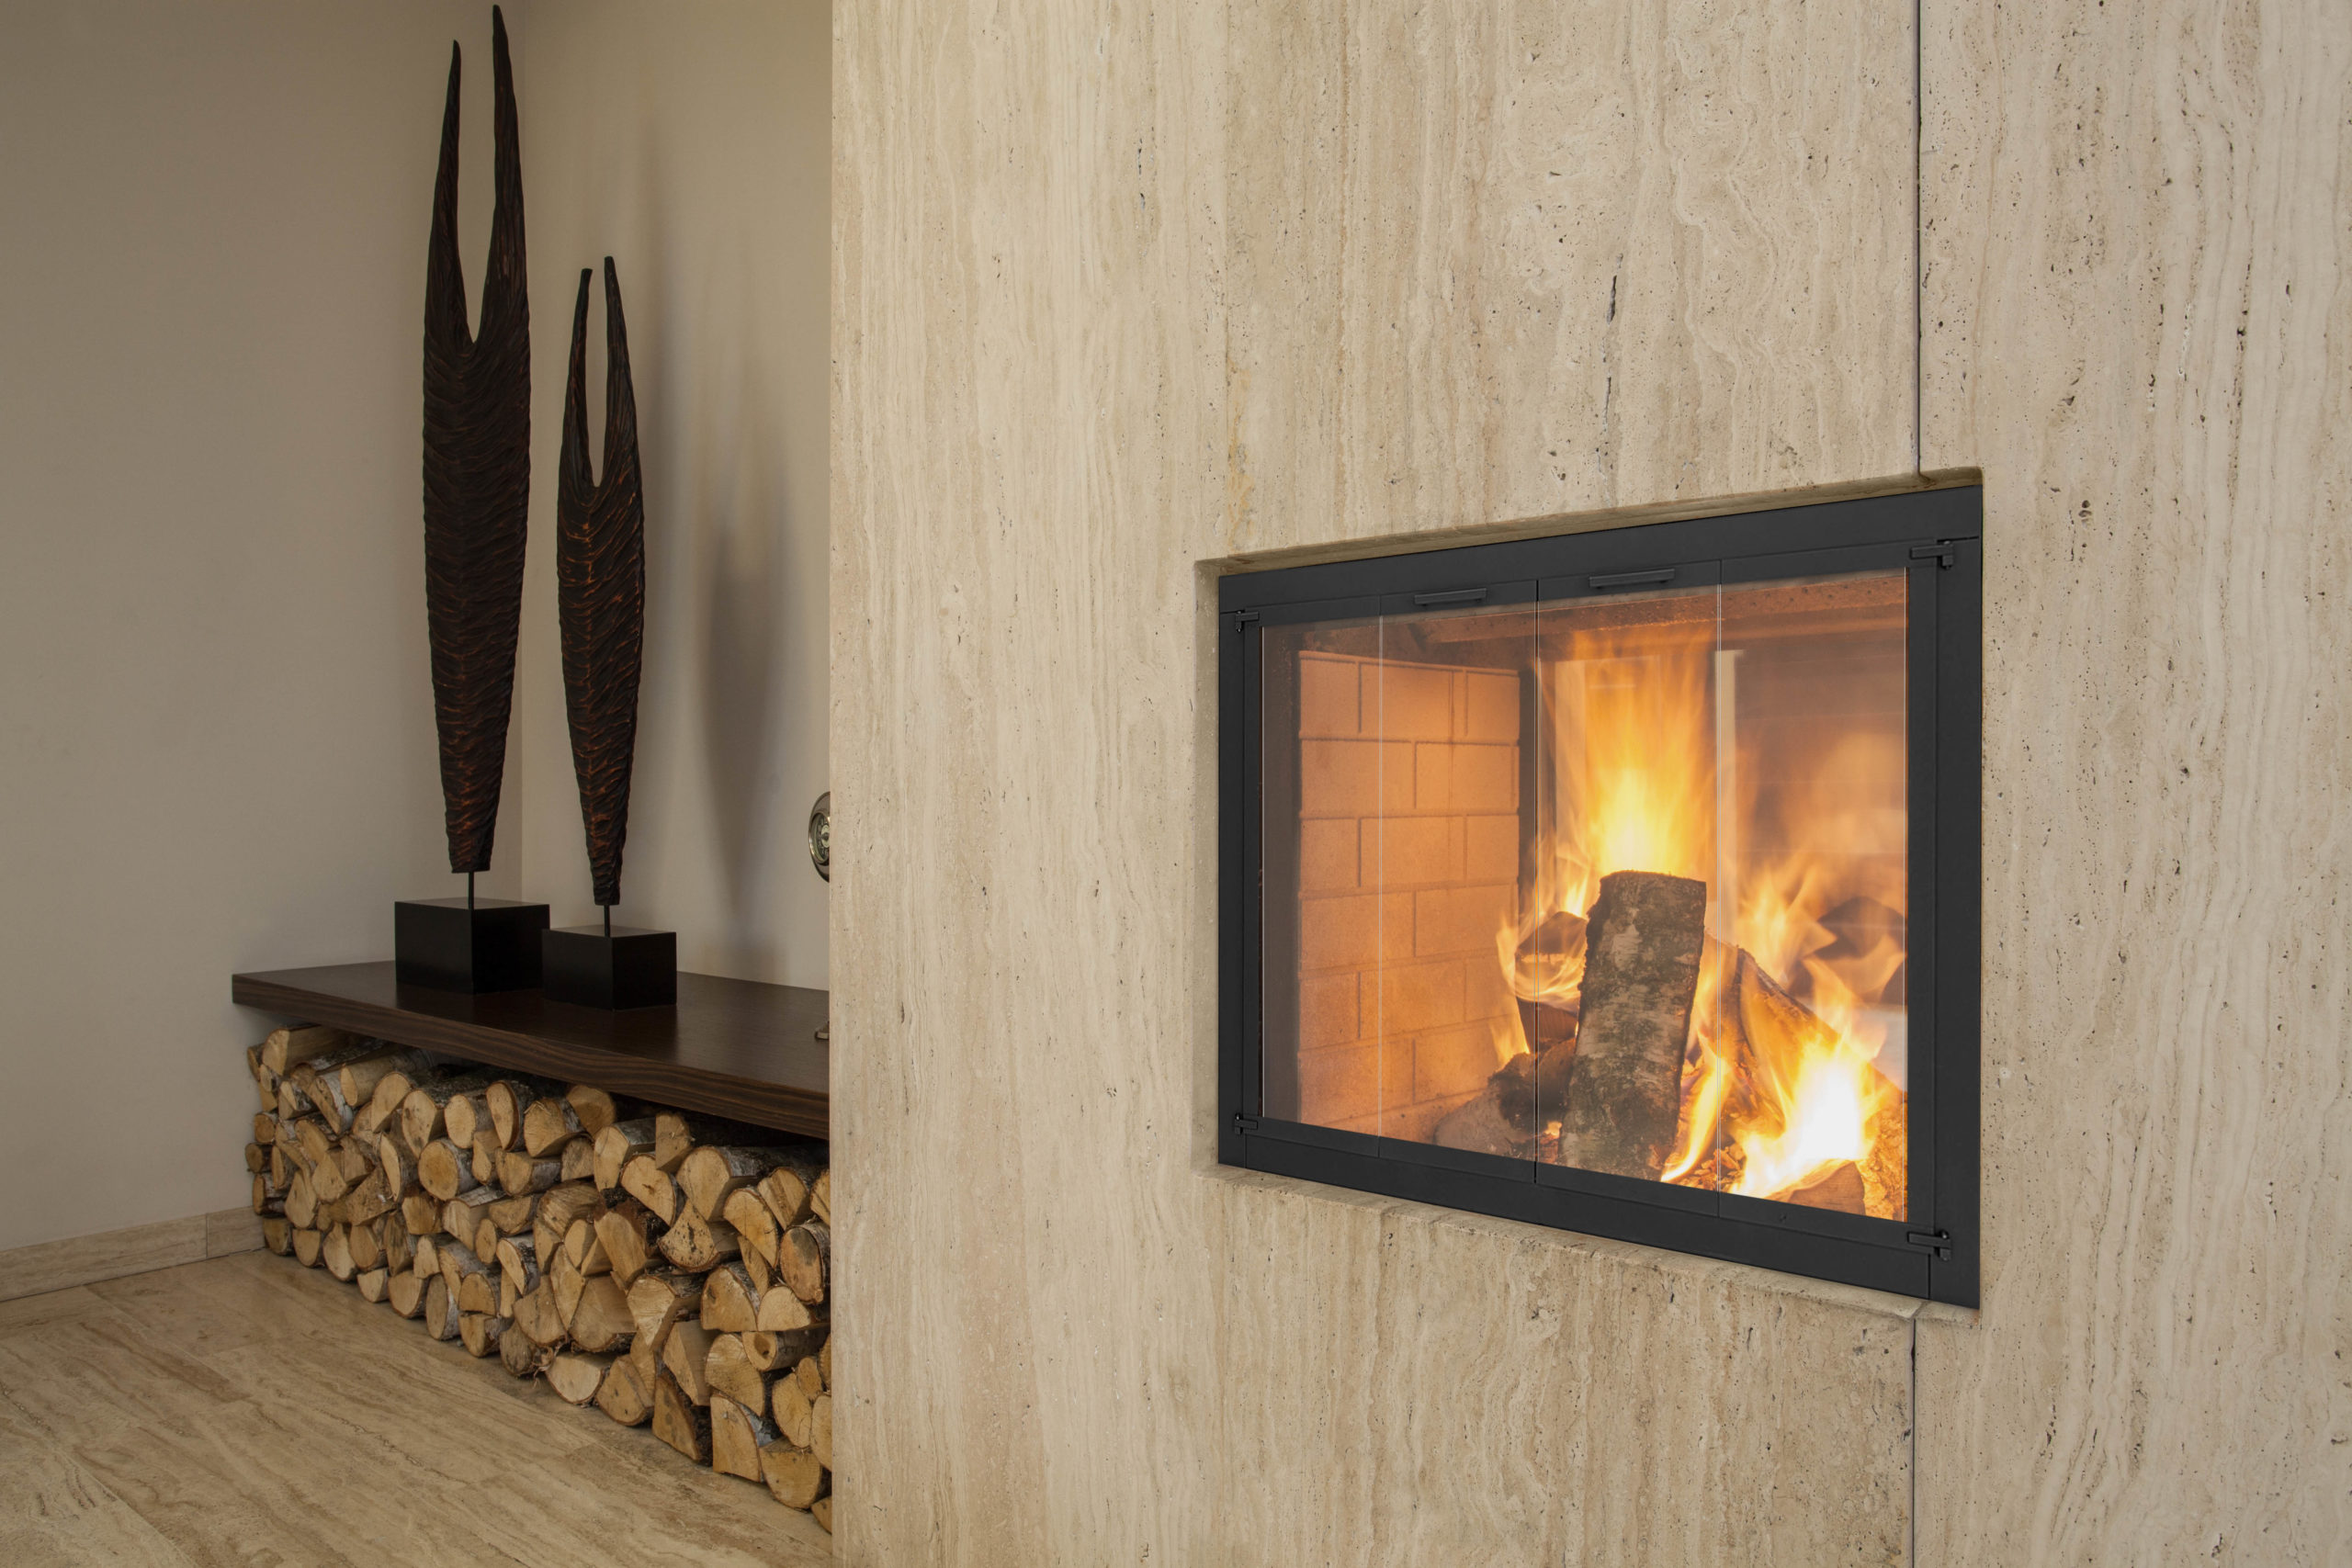 Travertine house: burning fireplace and pieces of wood